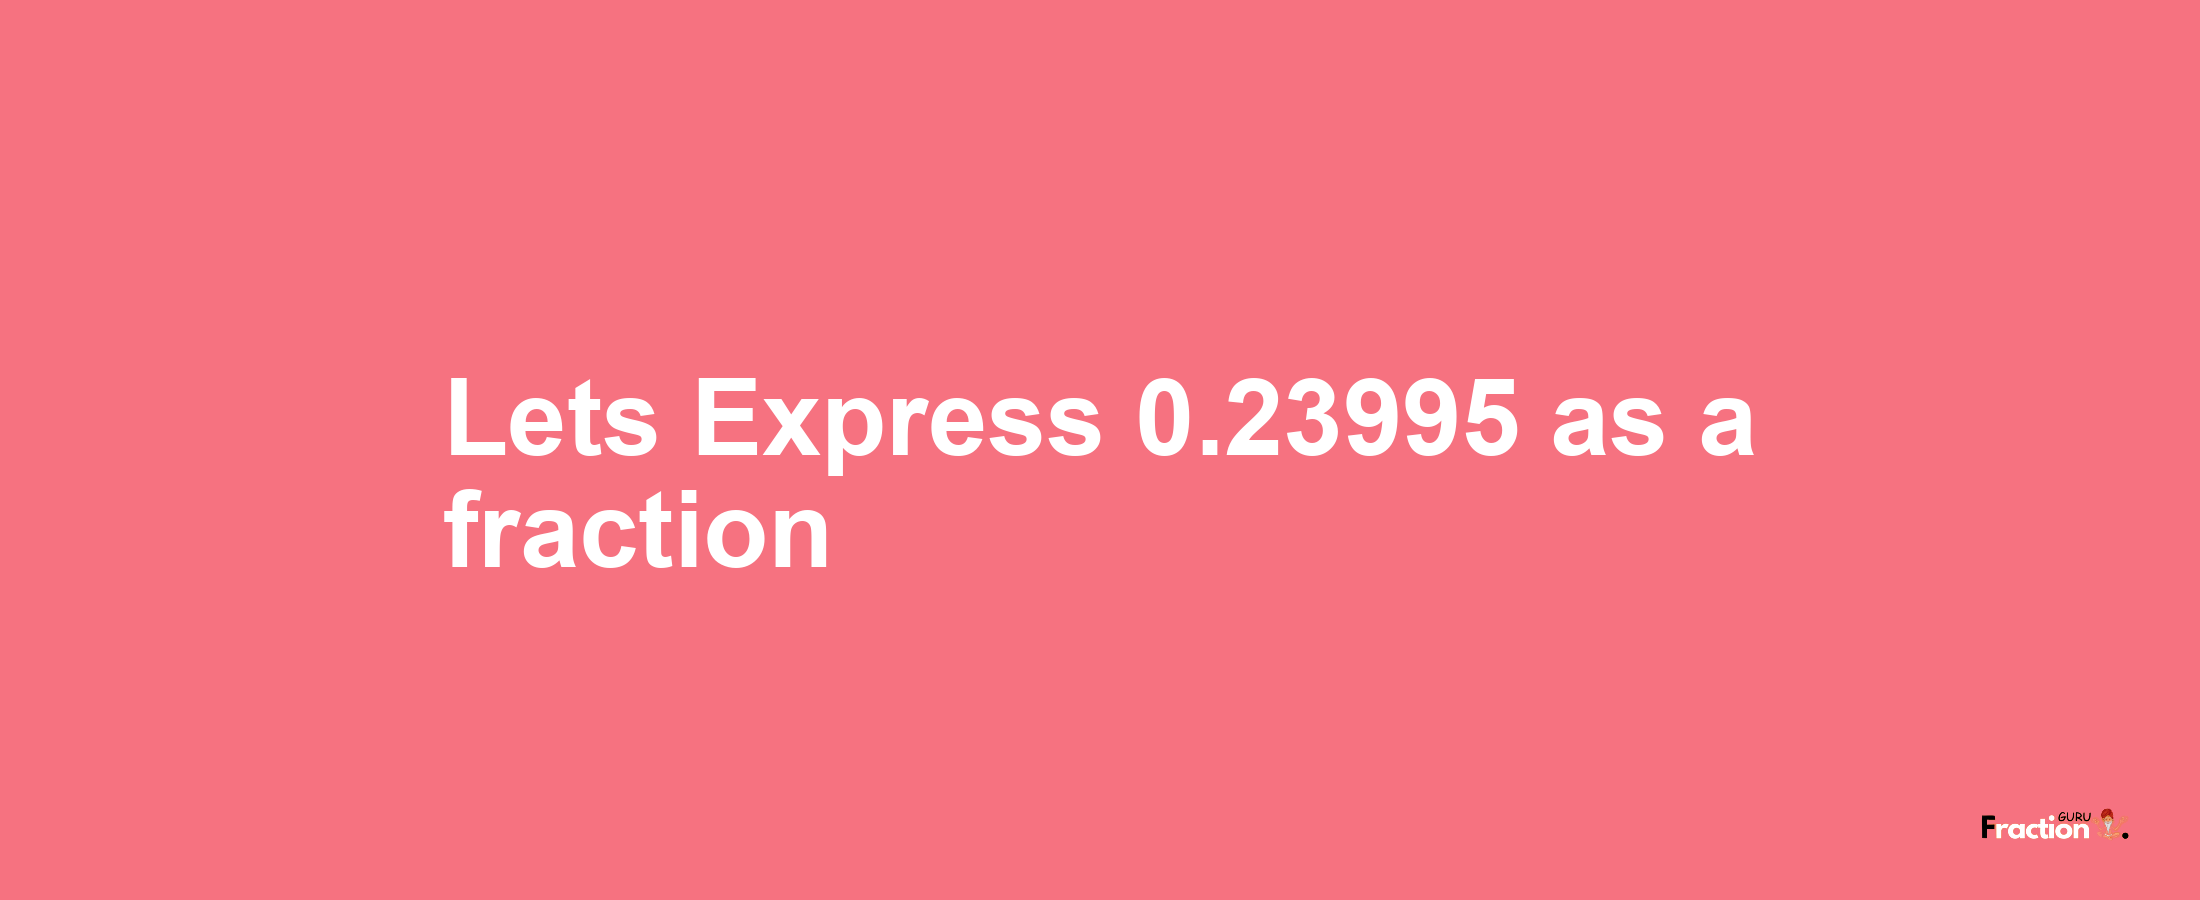 Lets Express 0.23995 as afraction